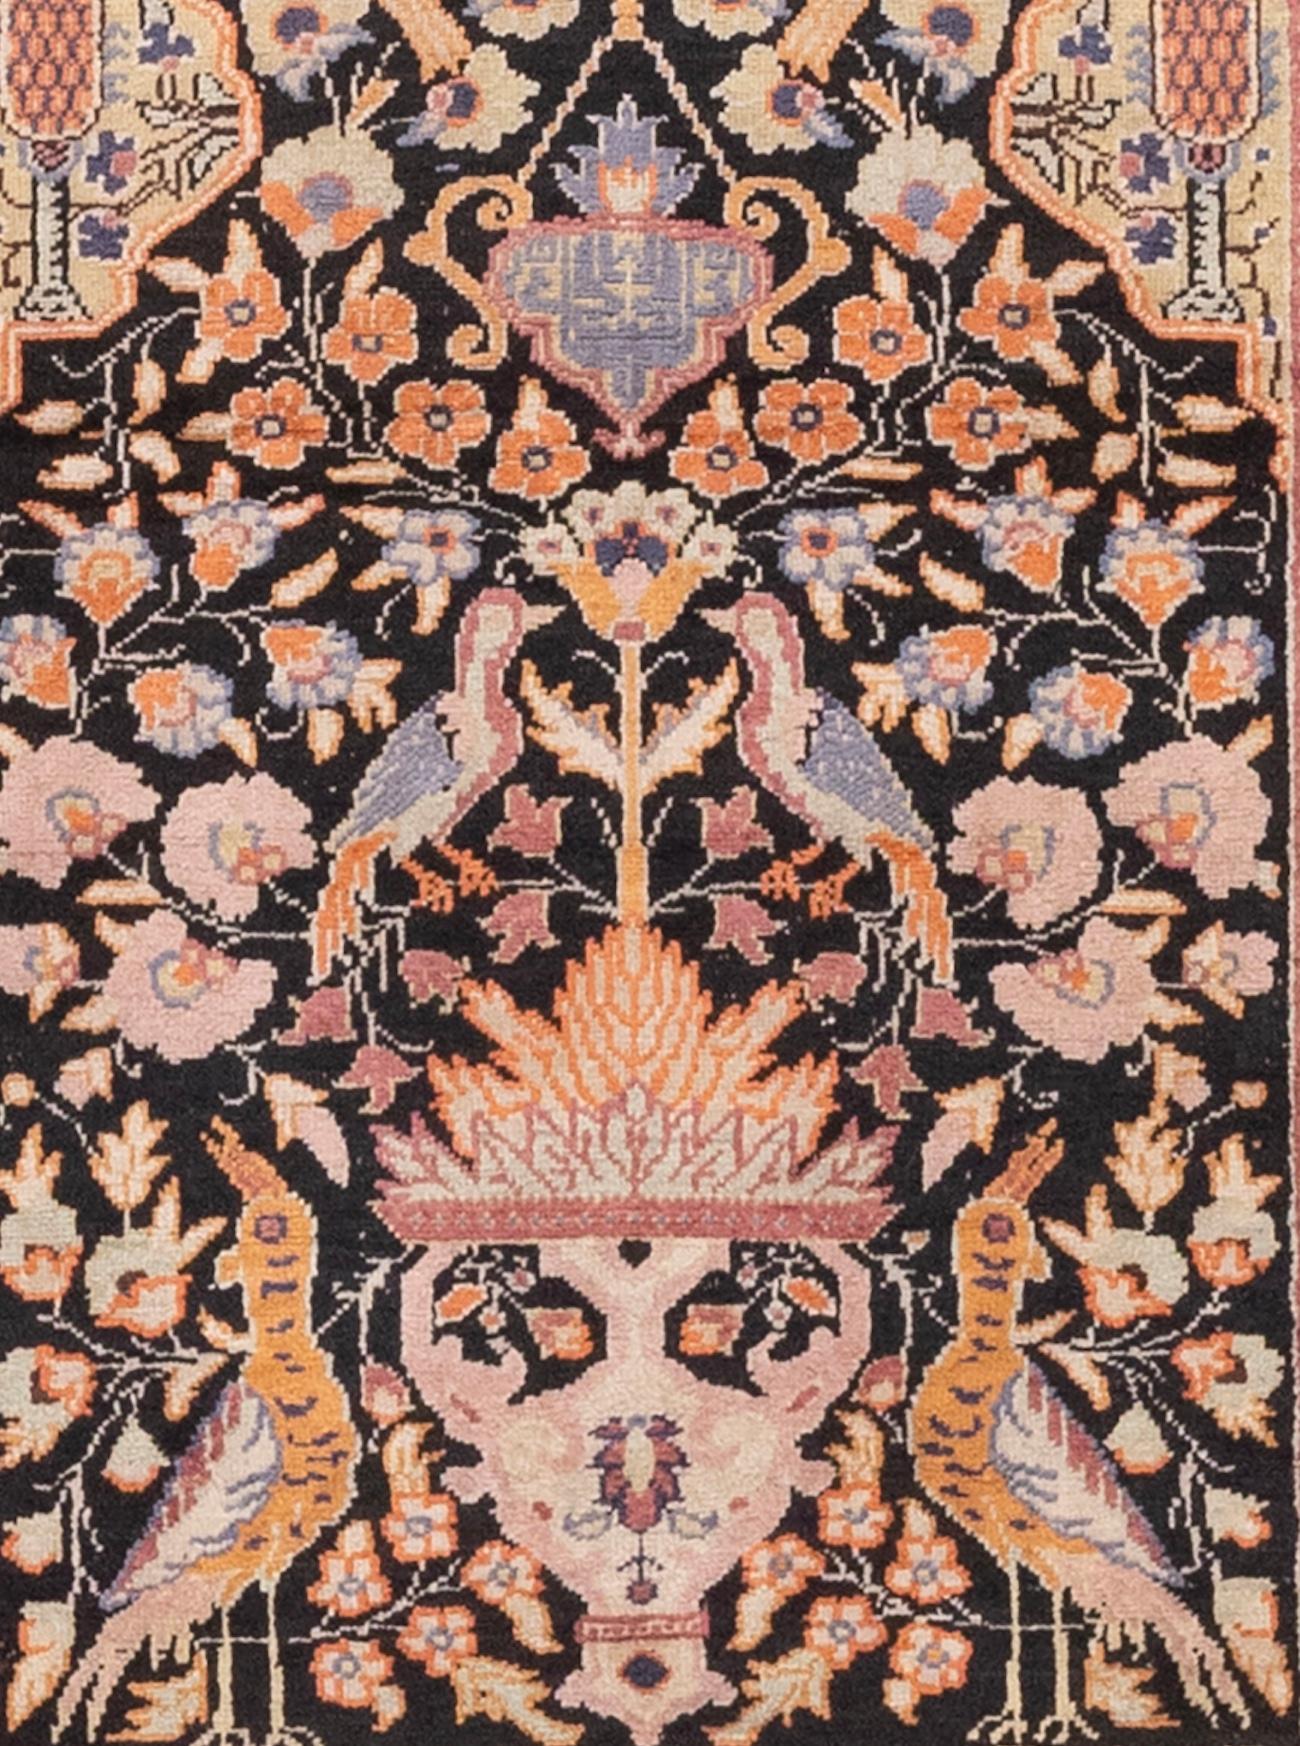 This exquisite Turkish prayer rug, adorned with enchanting bird motifs, is a true masterpiece of traditional craftsmanship and artistic expression. Handwoven with meticulous attention to detail, it showcases the skilled artistry and cultural